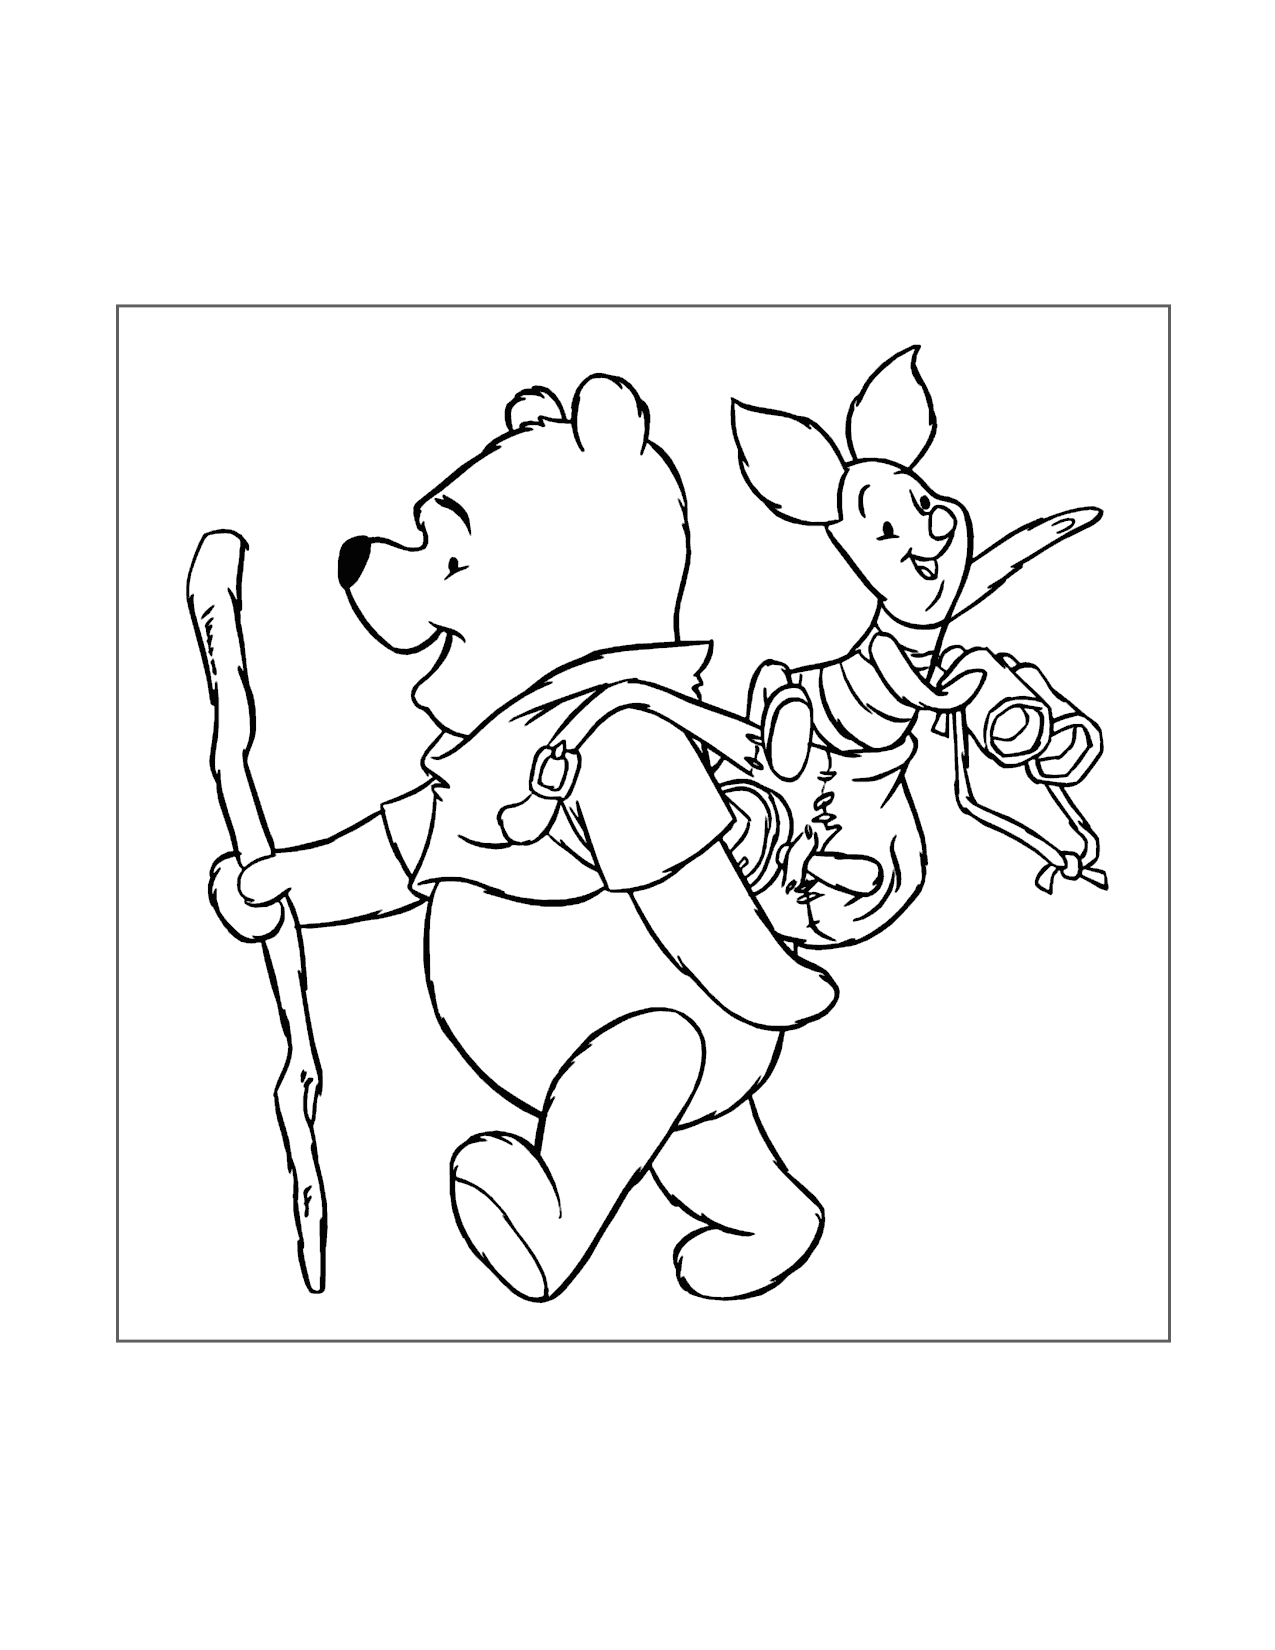 Pooh And Piglet On A Hike Coloring Pag